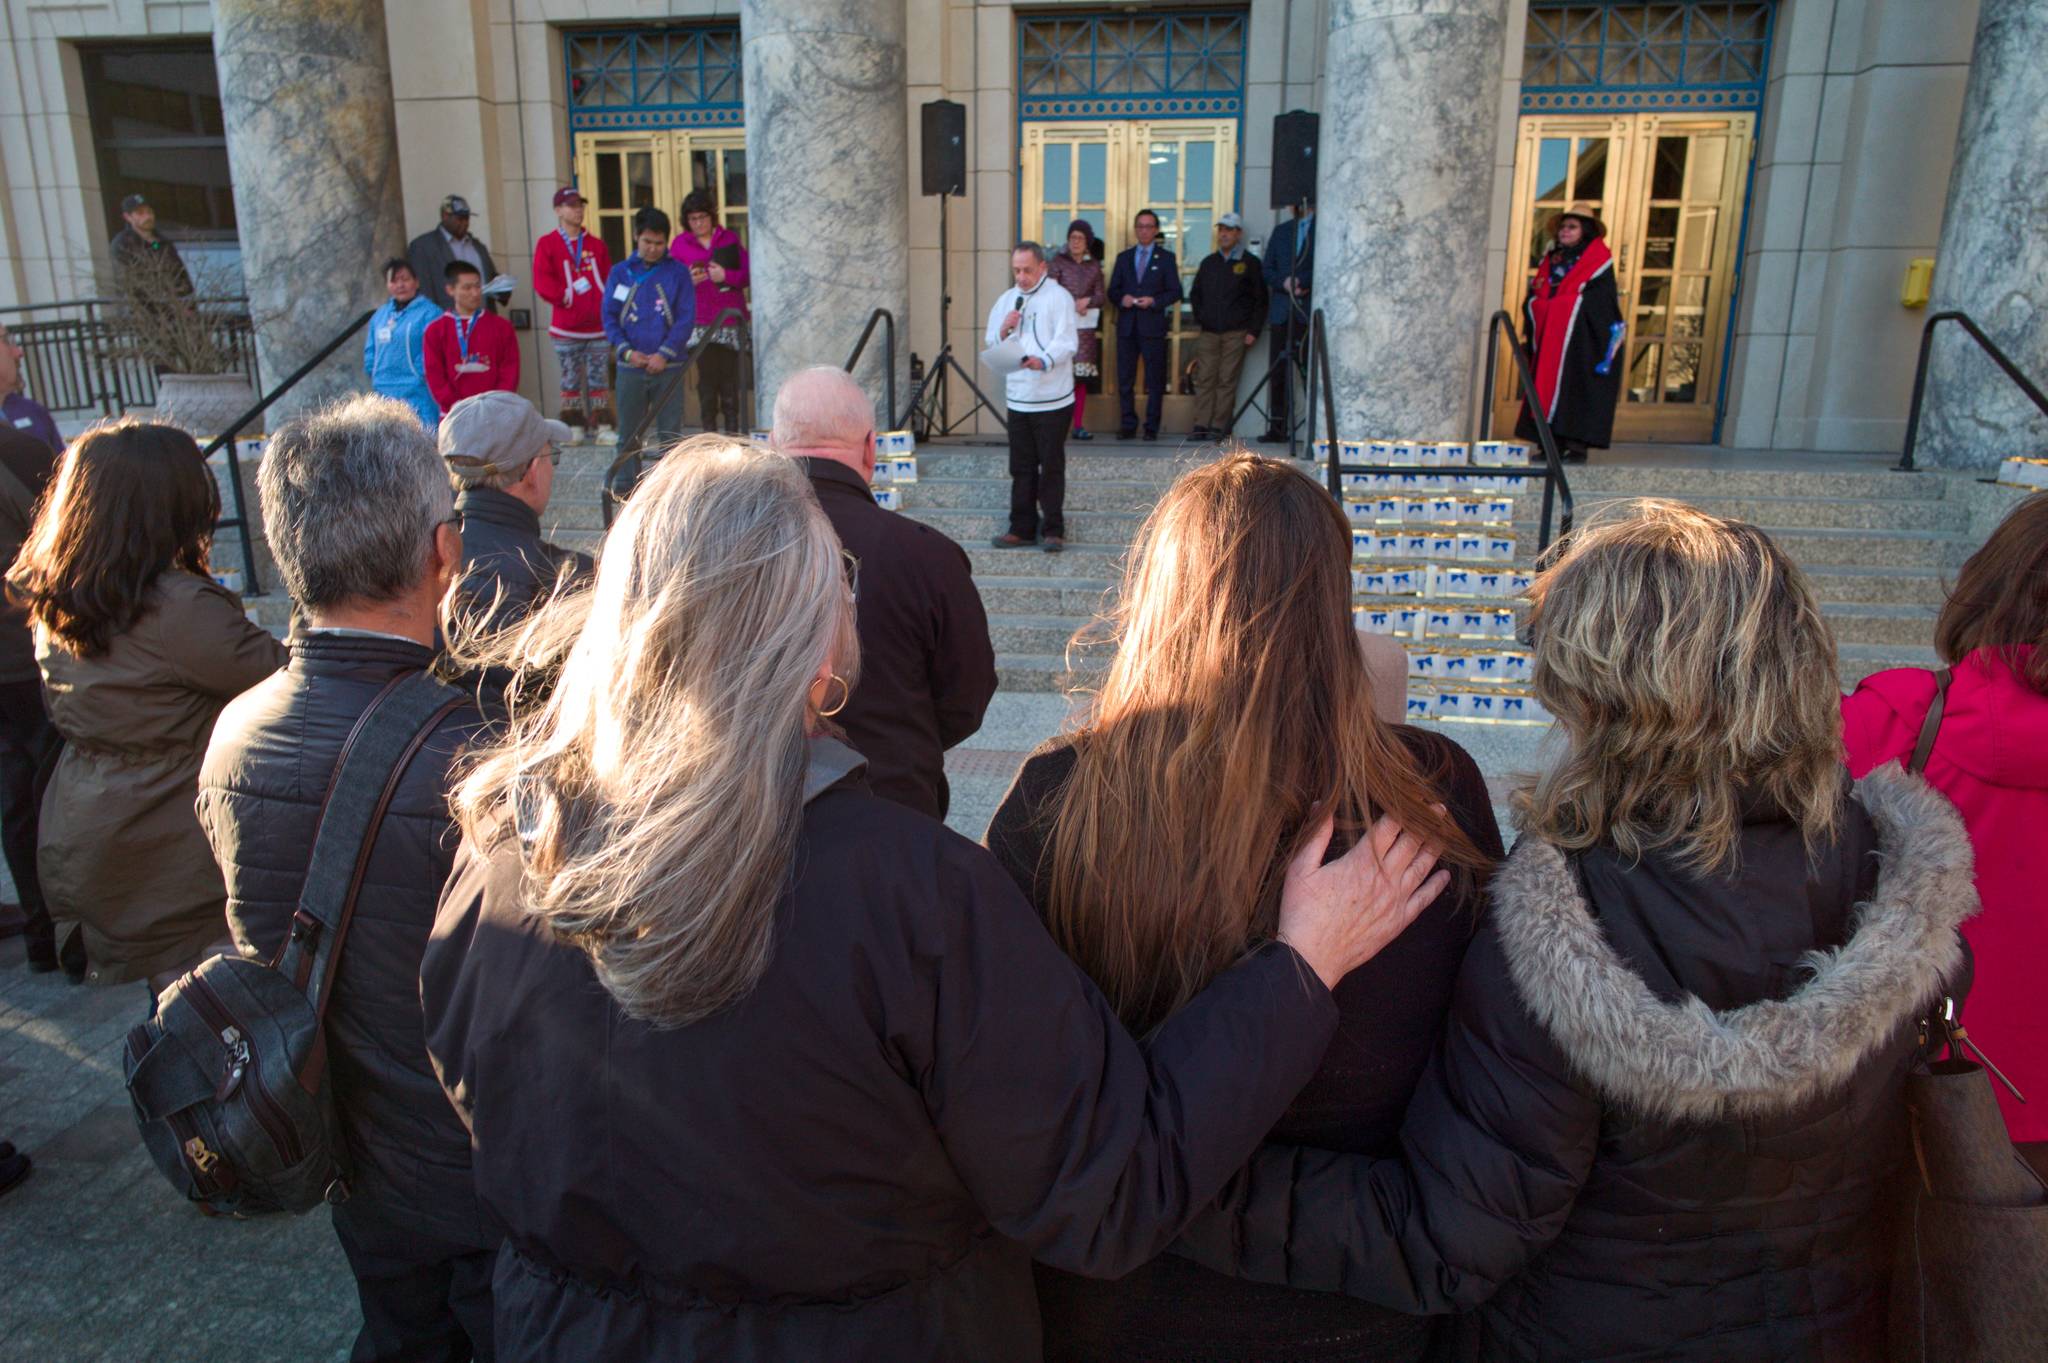 Juneau residents listen to James Biela, lead field advocate the Alaska Chapter of the American Foundation for Suicide Prevention, as he speaks at a candlelight vigil to raise awareness at the Capitol on Tuesday, March 26, 2019. (Michael Penn | Juneau Empire)